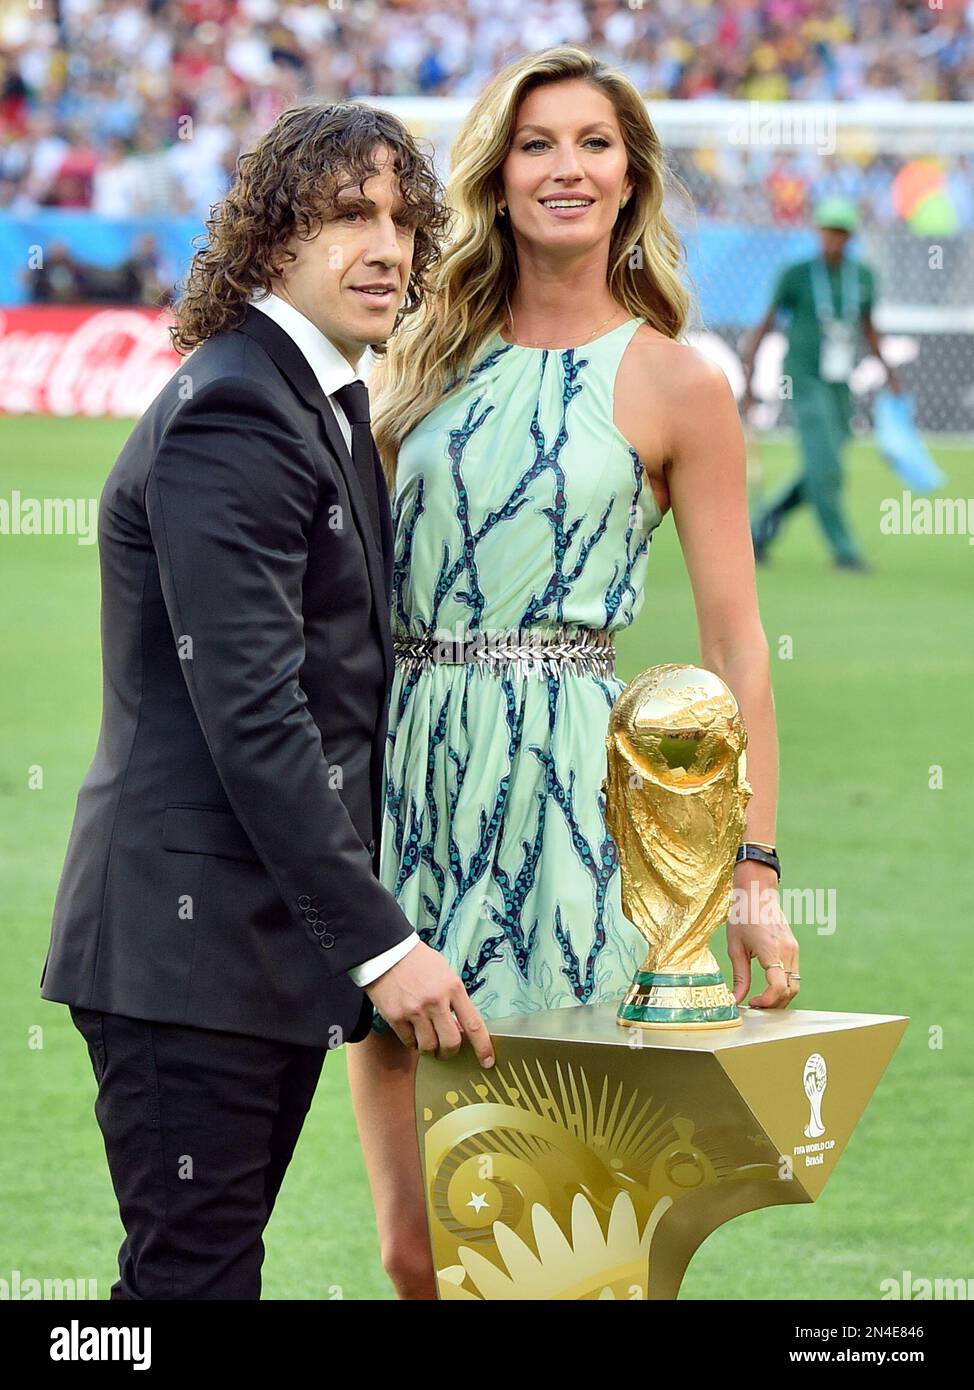 Supermodel Gisele Bundchen and 2010 FIFA World Cup Champion Carlos Puyol  revealing the trophy in a specially cr…